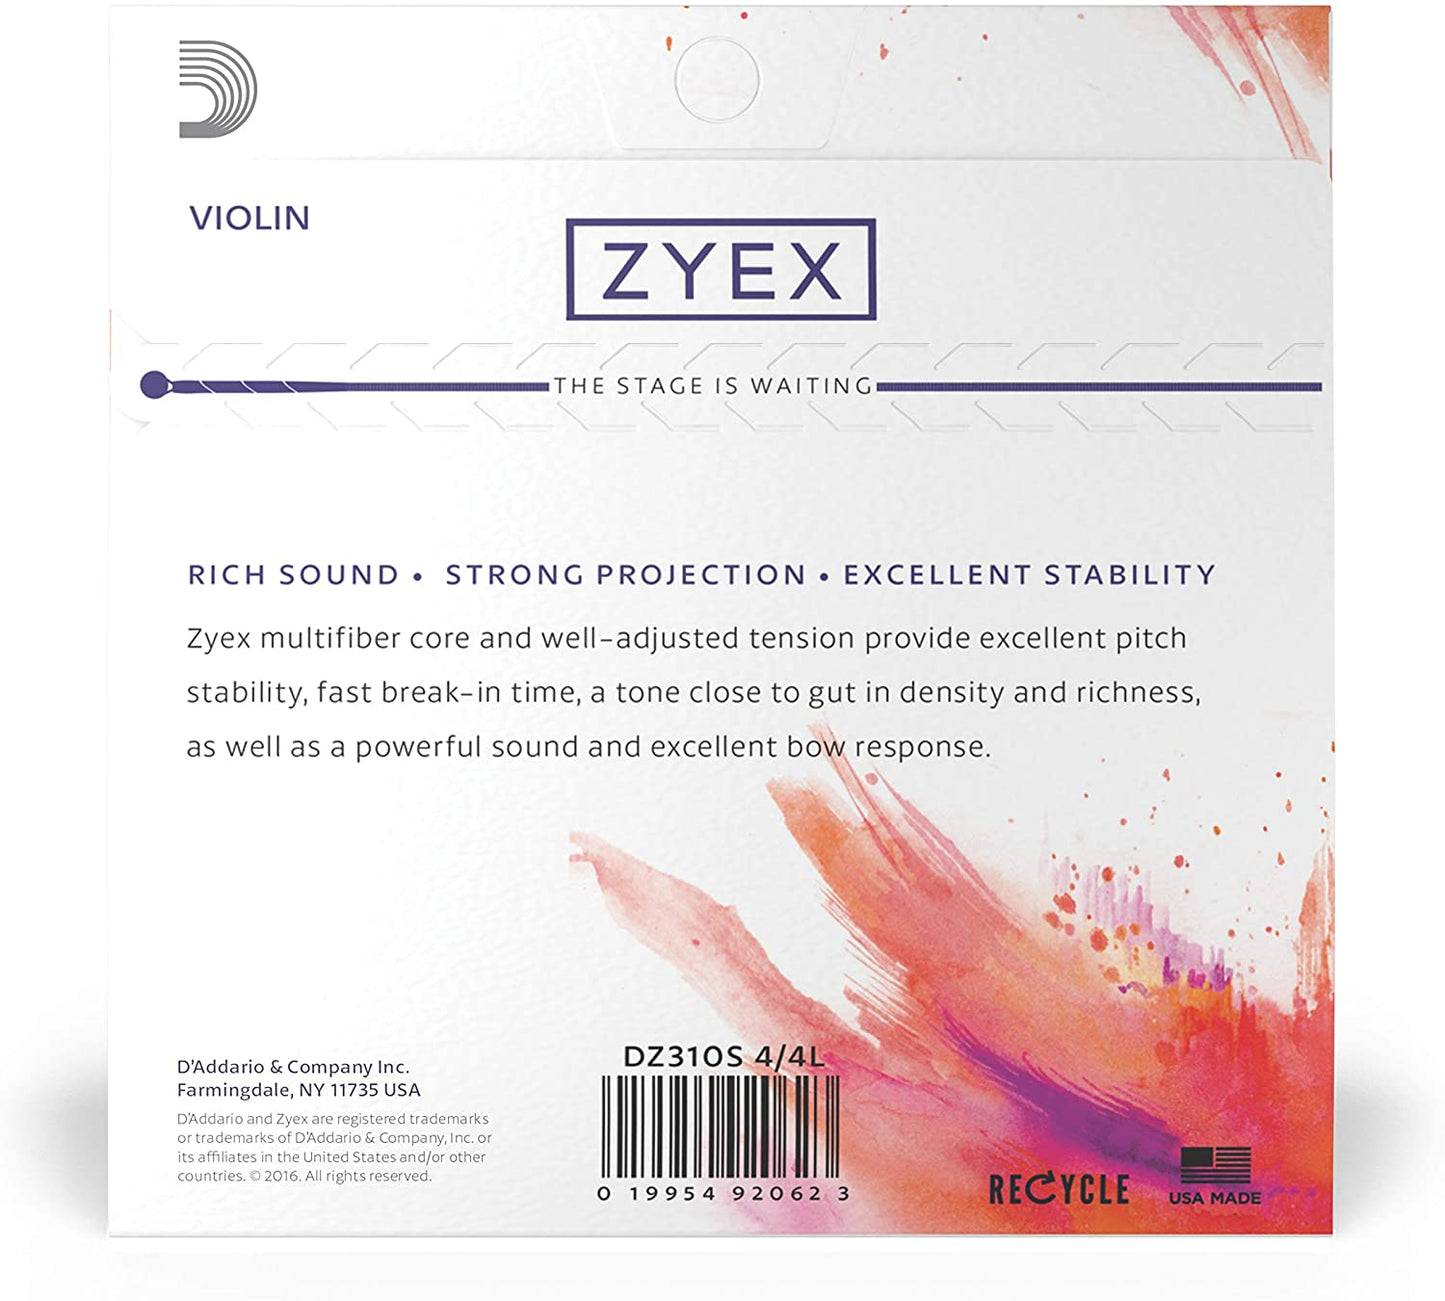 D'Addario Zyex 4/4 Scale Light Tension Silver D Violin String Set (DZ310S 4/4L) for Professional and Students Musicians, Intermediate Players